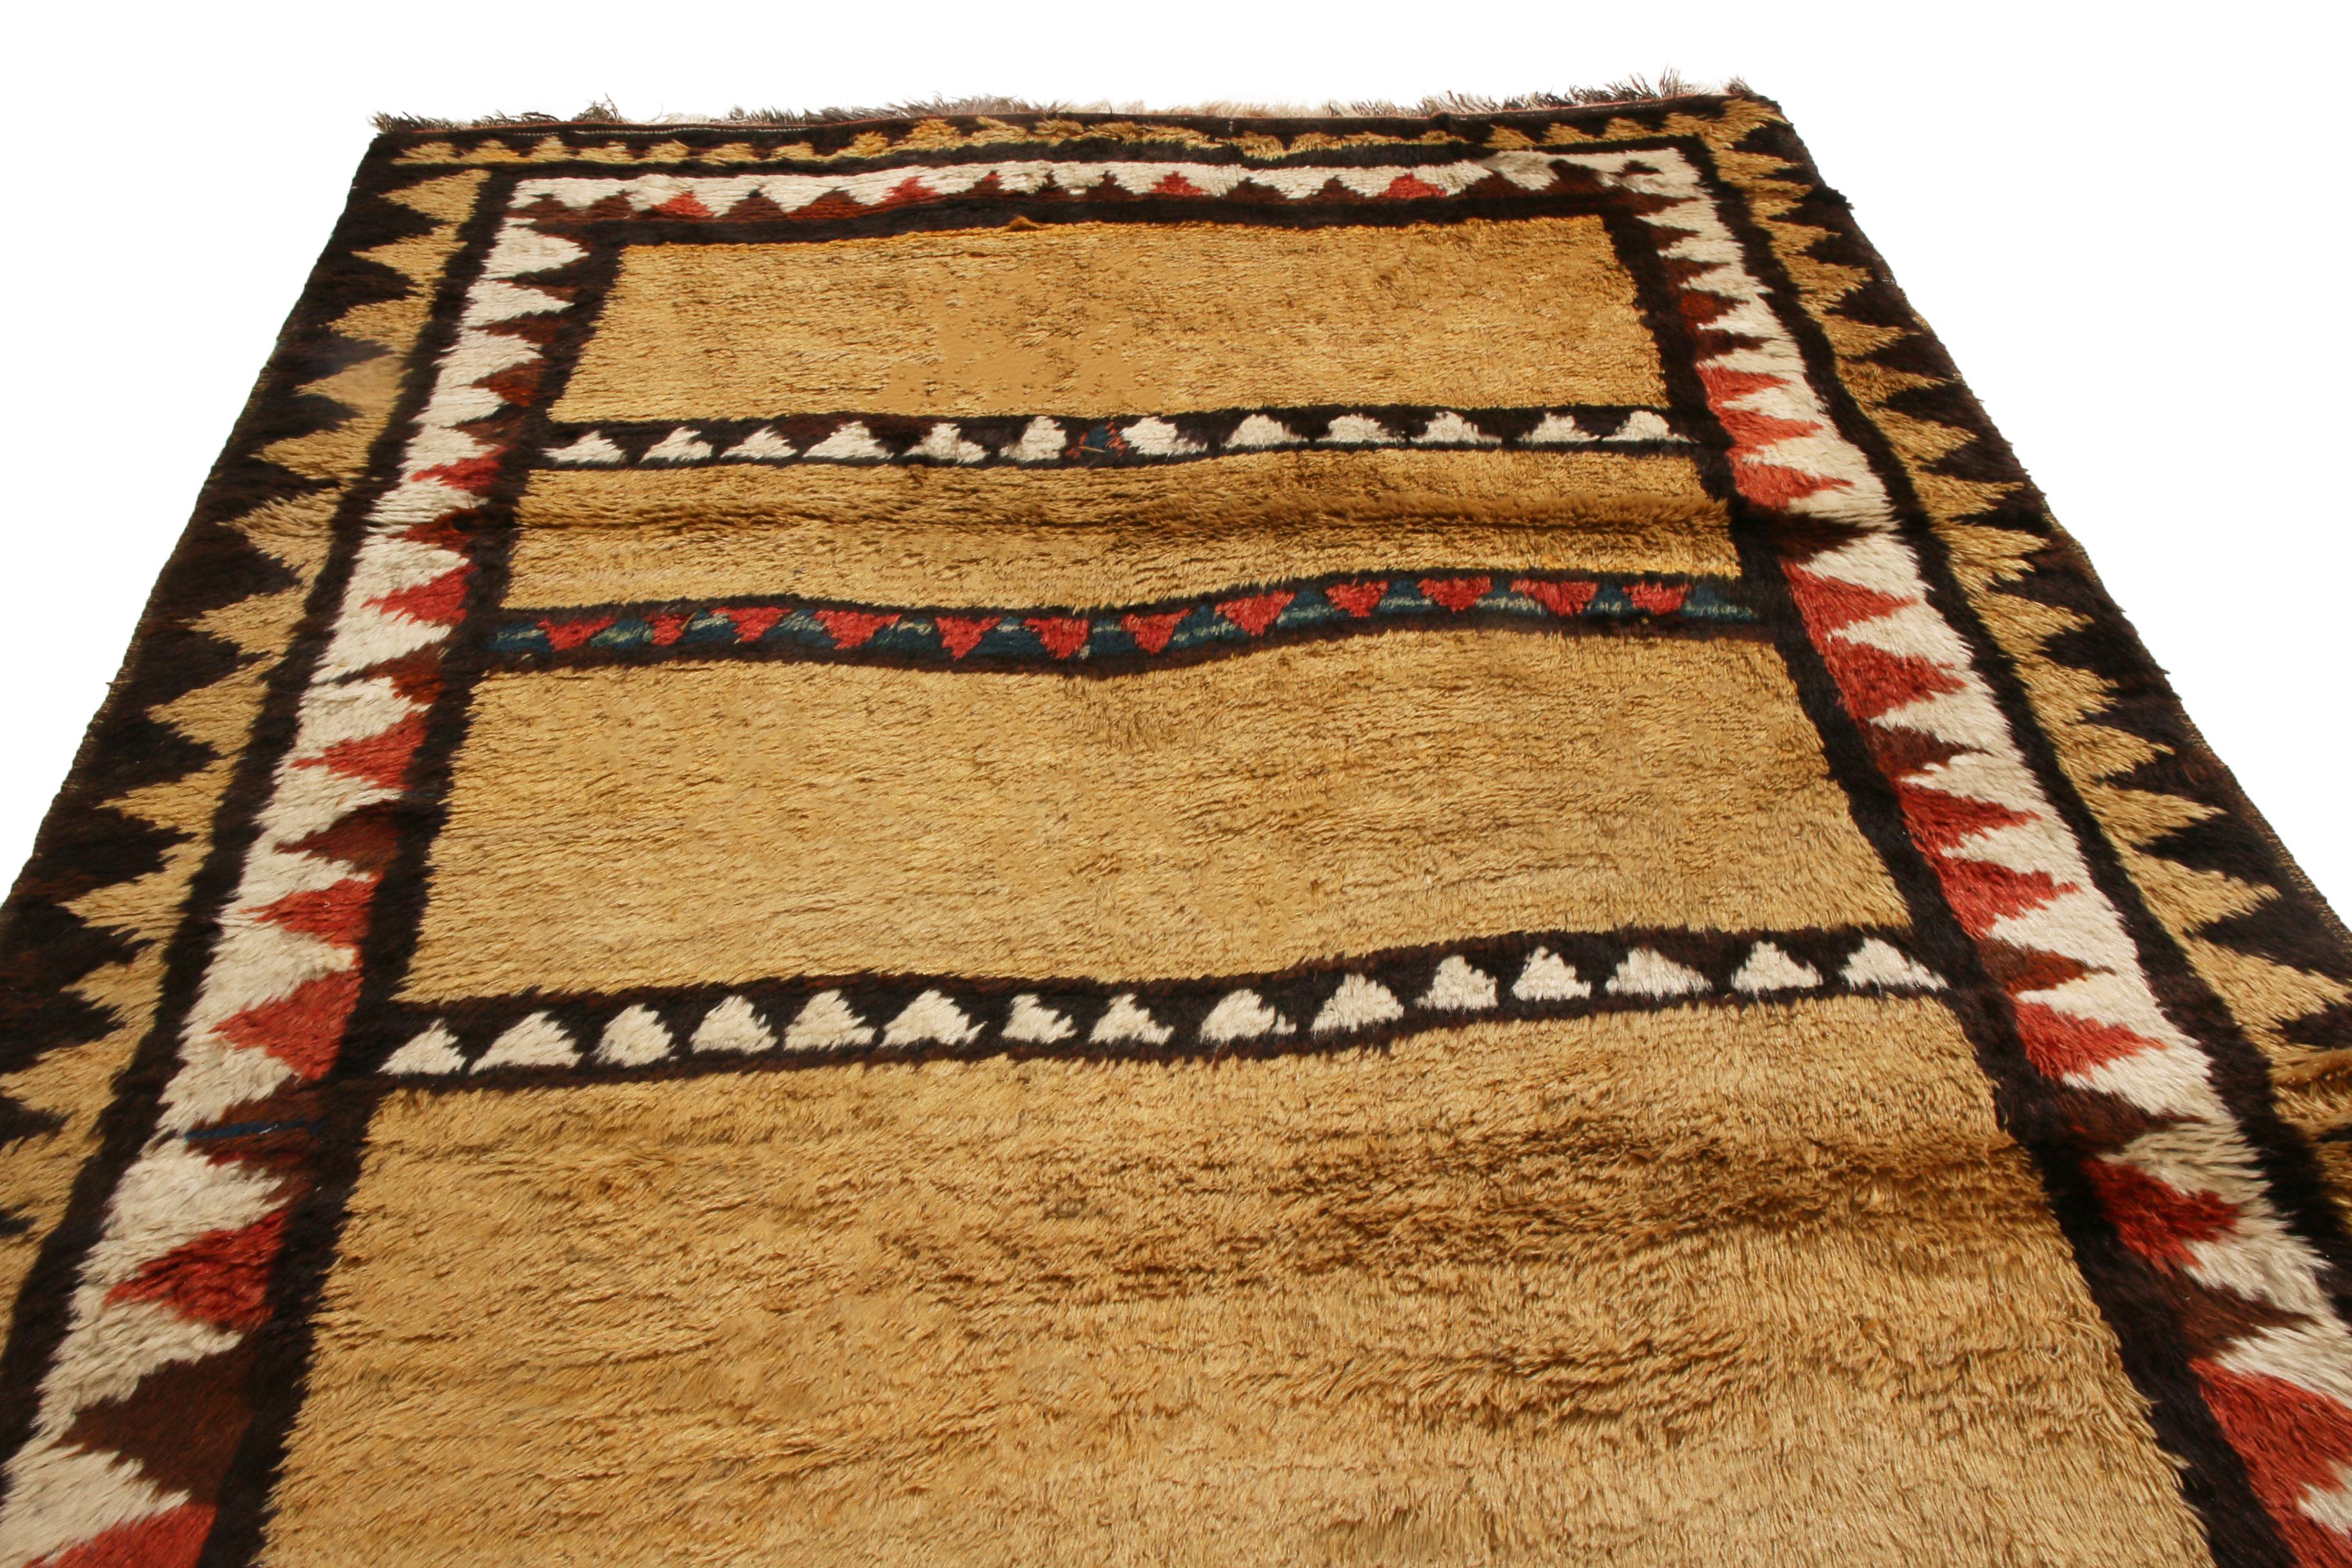 Originating from Russia between 1900-1920, this antique transitional Kurdish rug employs a Minimalist tribal design with mirrored abarash fringes along its vertical width. Hand knotted in lush, high quality wool pile, Kurdish pieces have been known